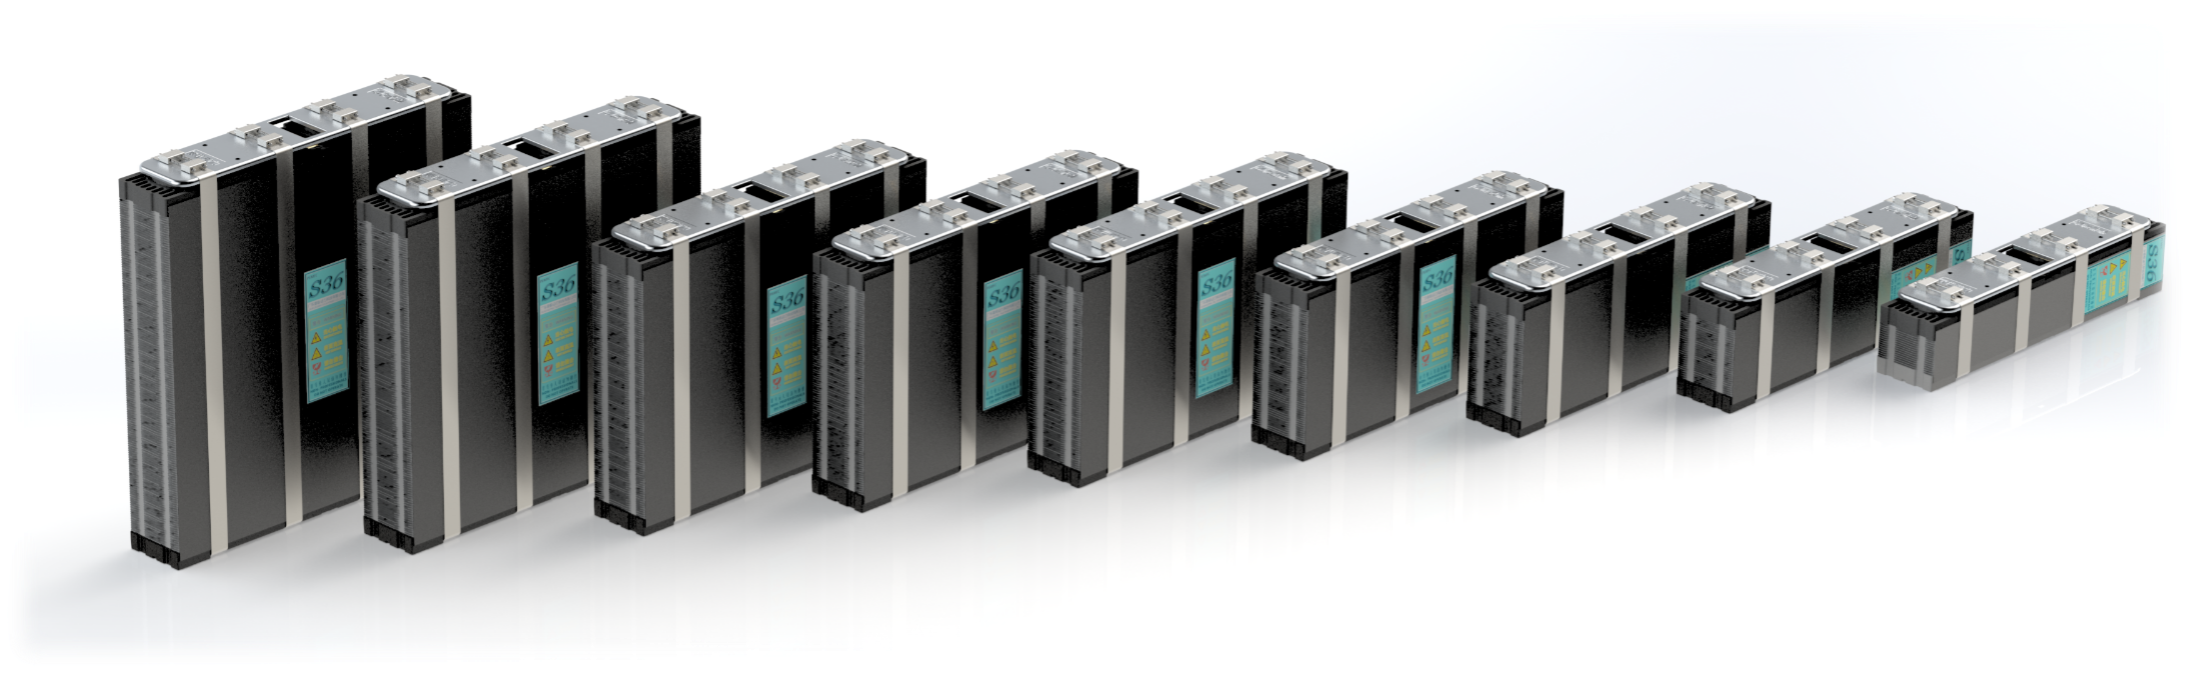 S36 series liquid-cooled PEM fuel cell stack